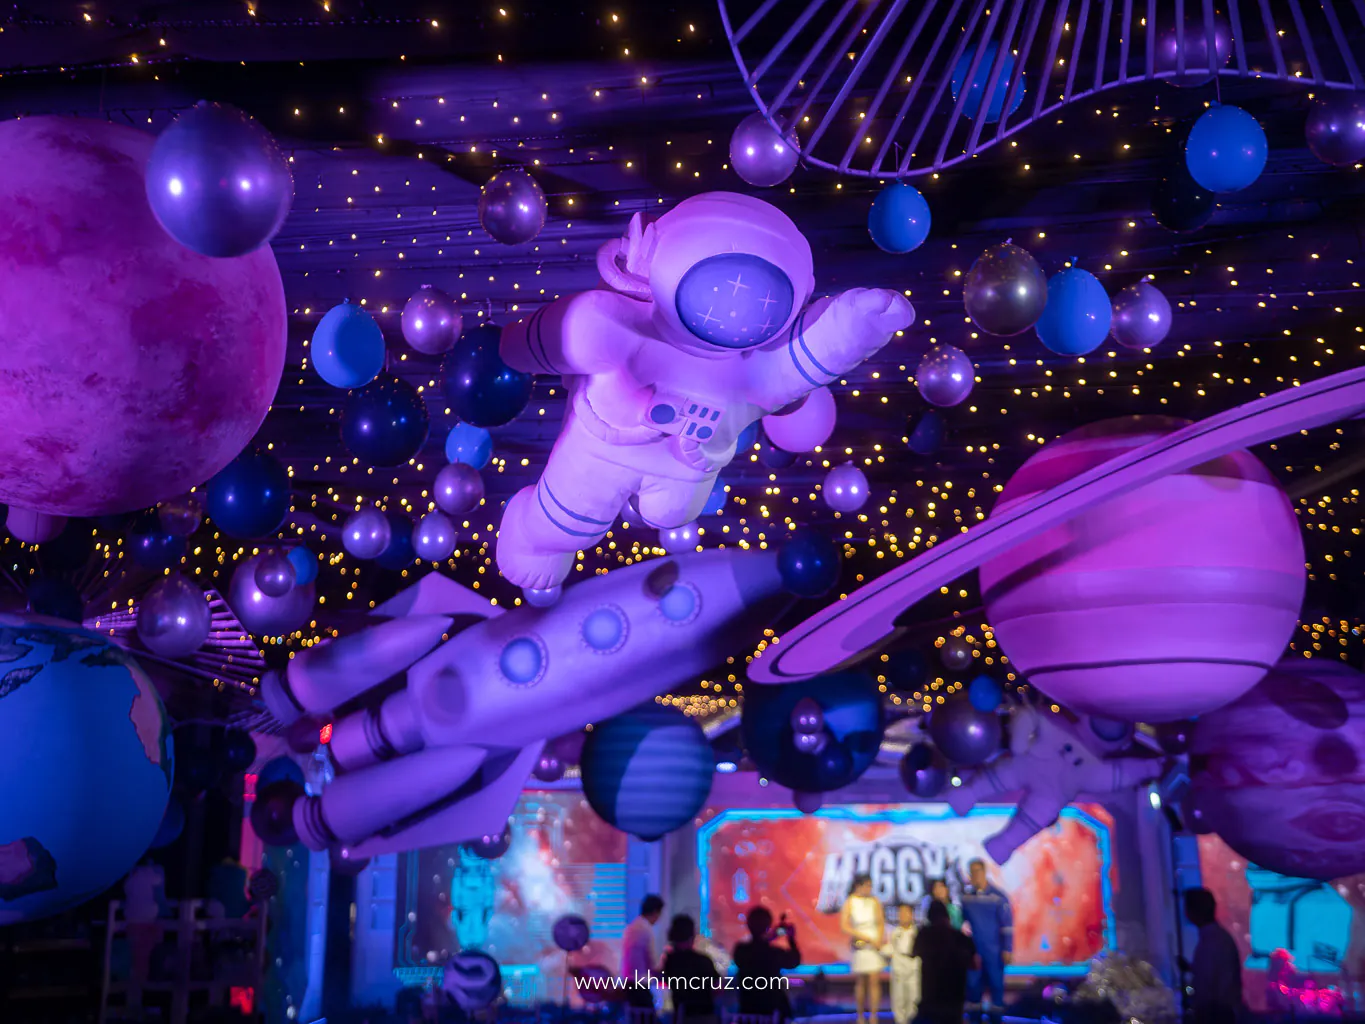 Astronaut walk amongst planet and stars on a space-themed kid's birthday party